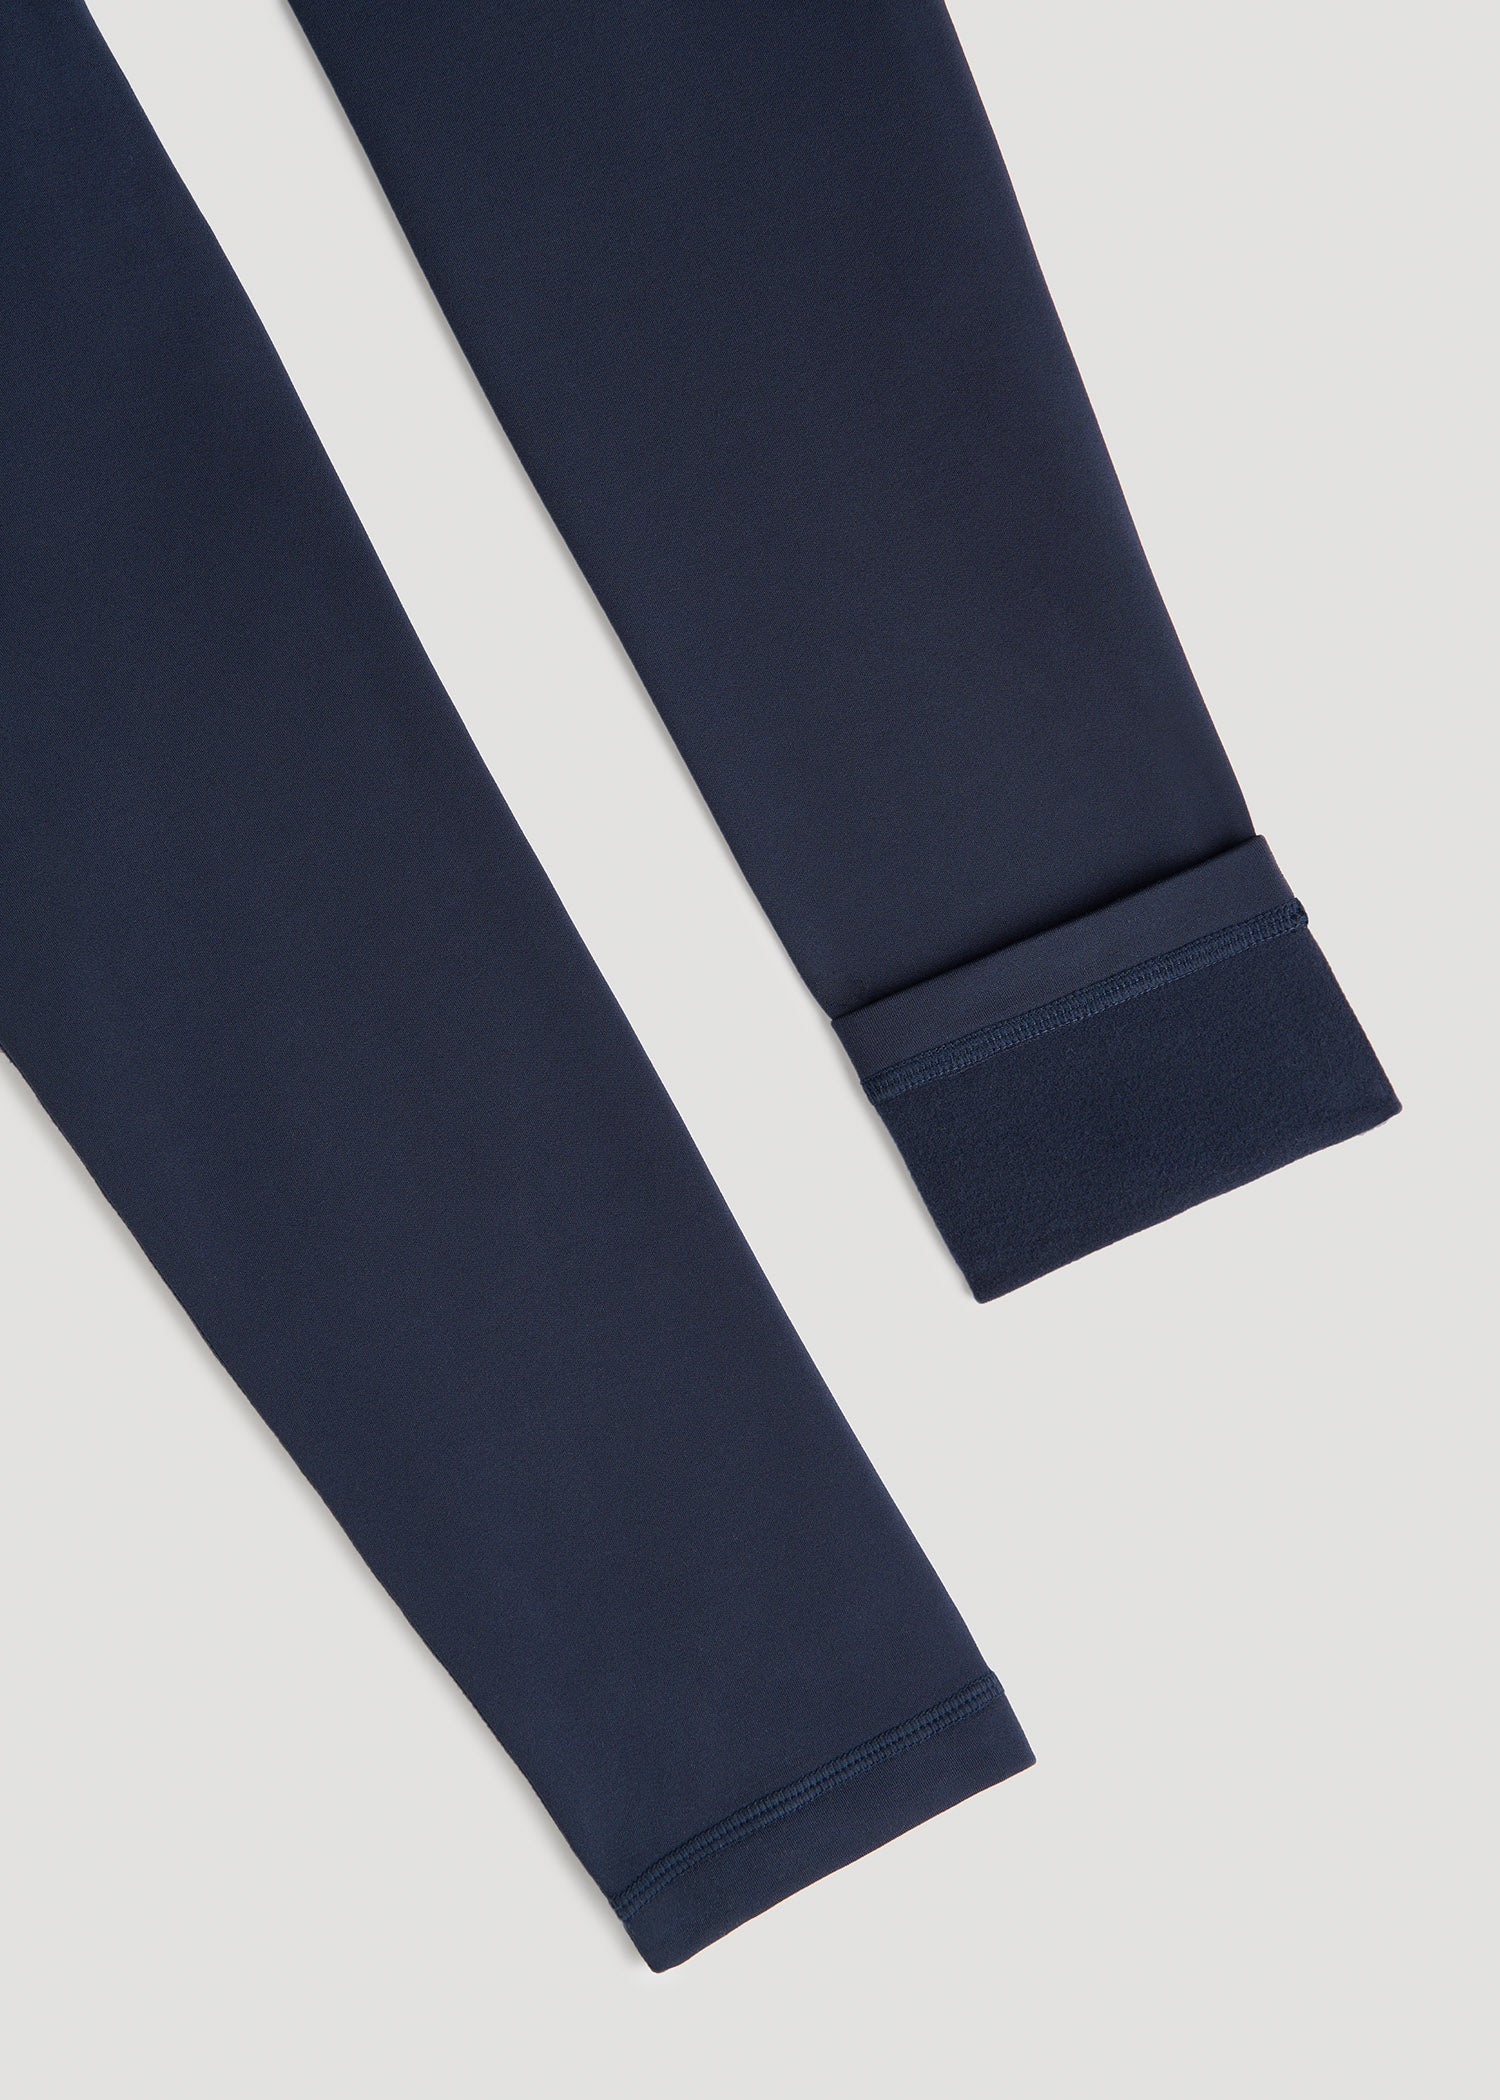 EXTRA LONG Leggings TALL Womens Viscose Stretch NAVY SIZE 20 22 24